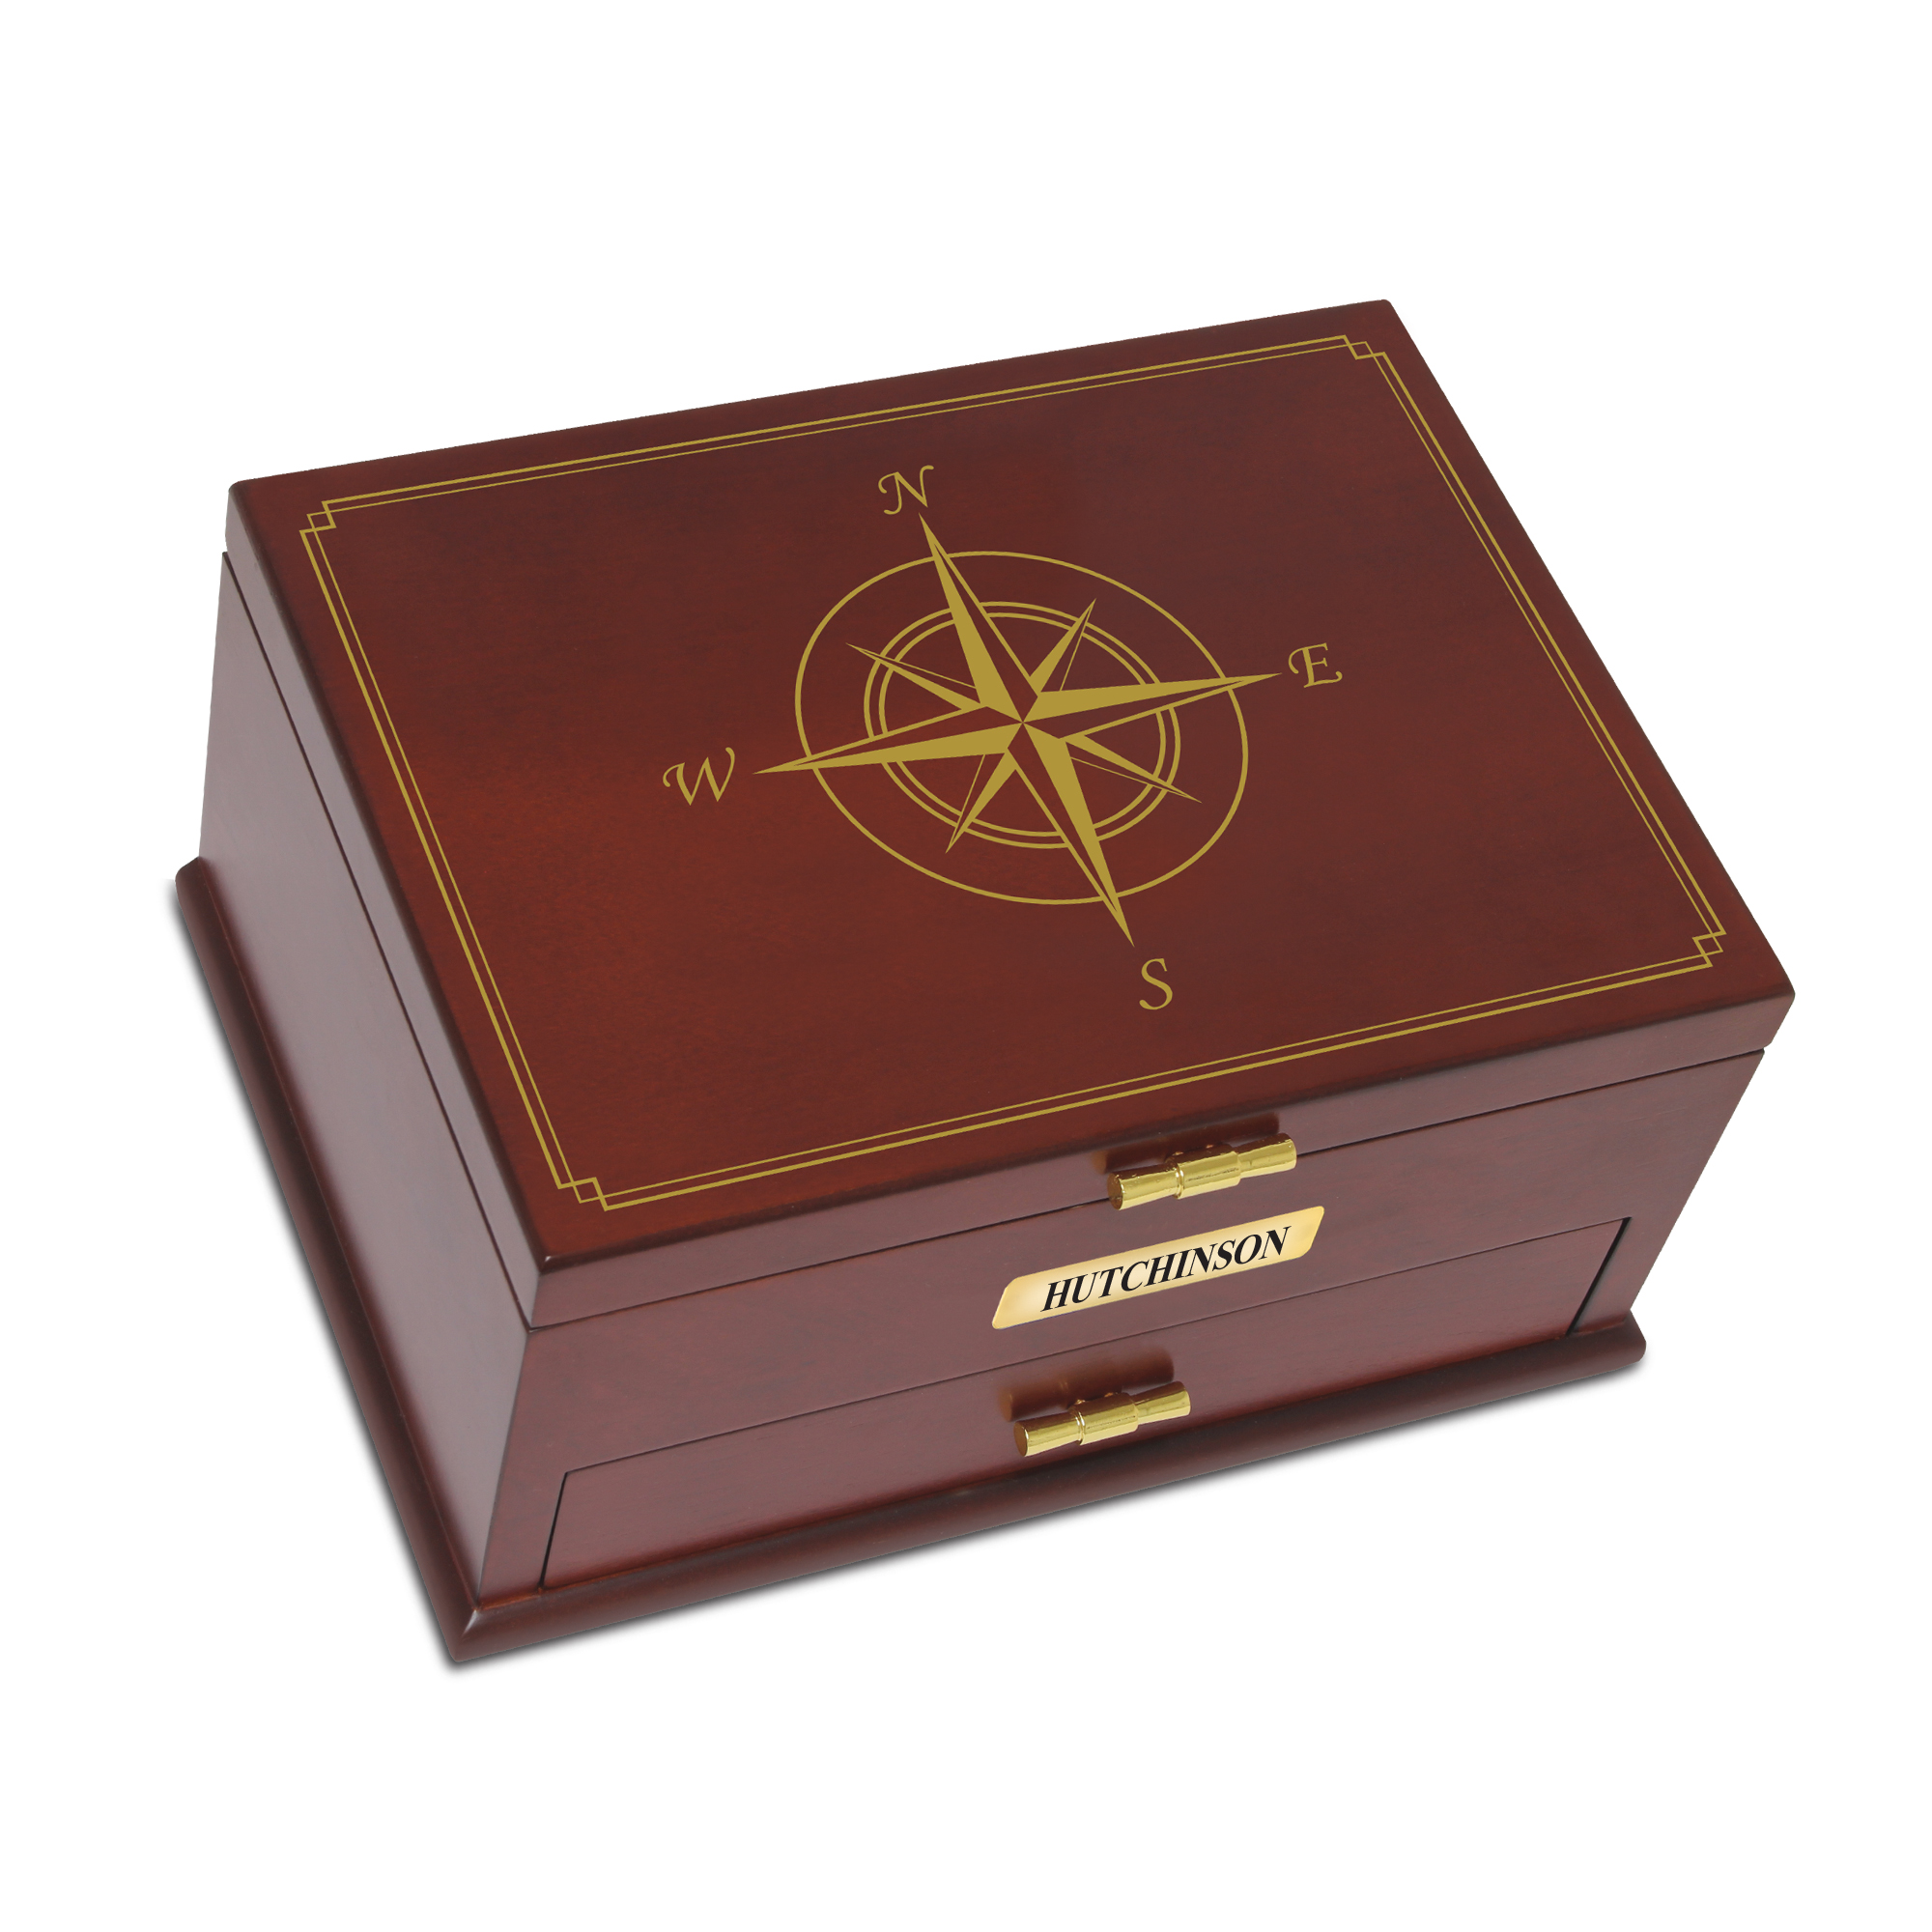 The Personalized Son Valet Box 2569 0066 b open box